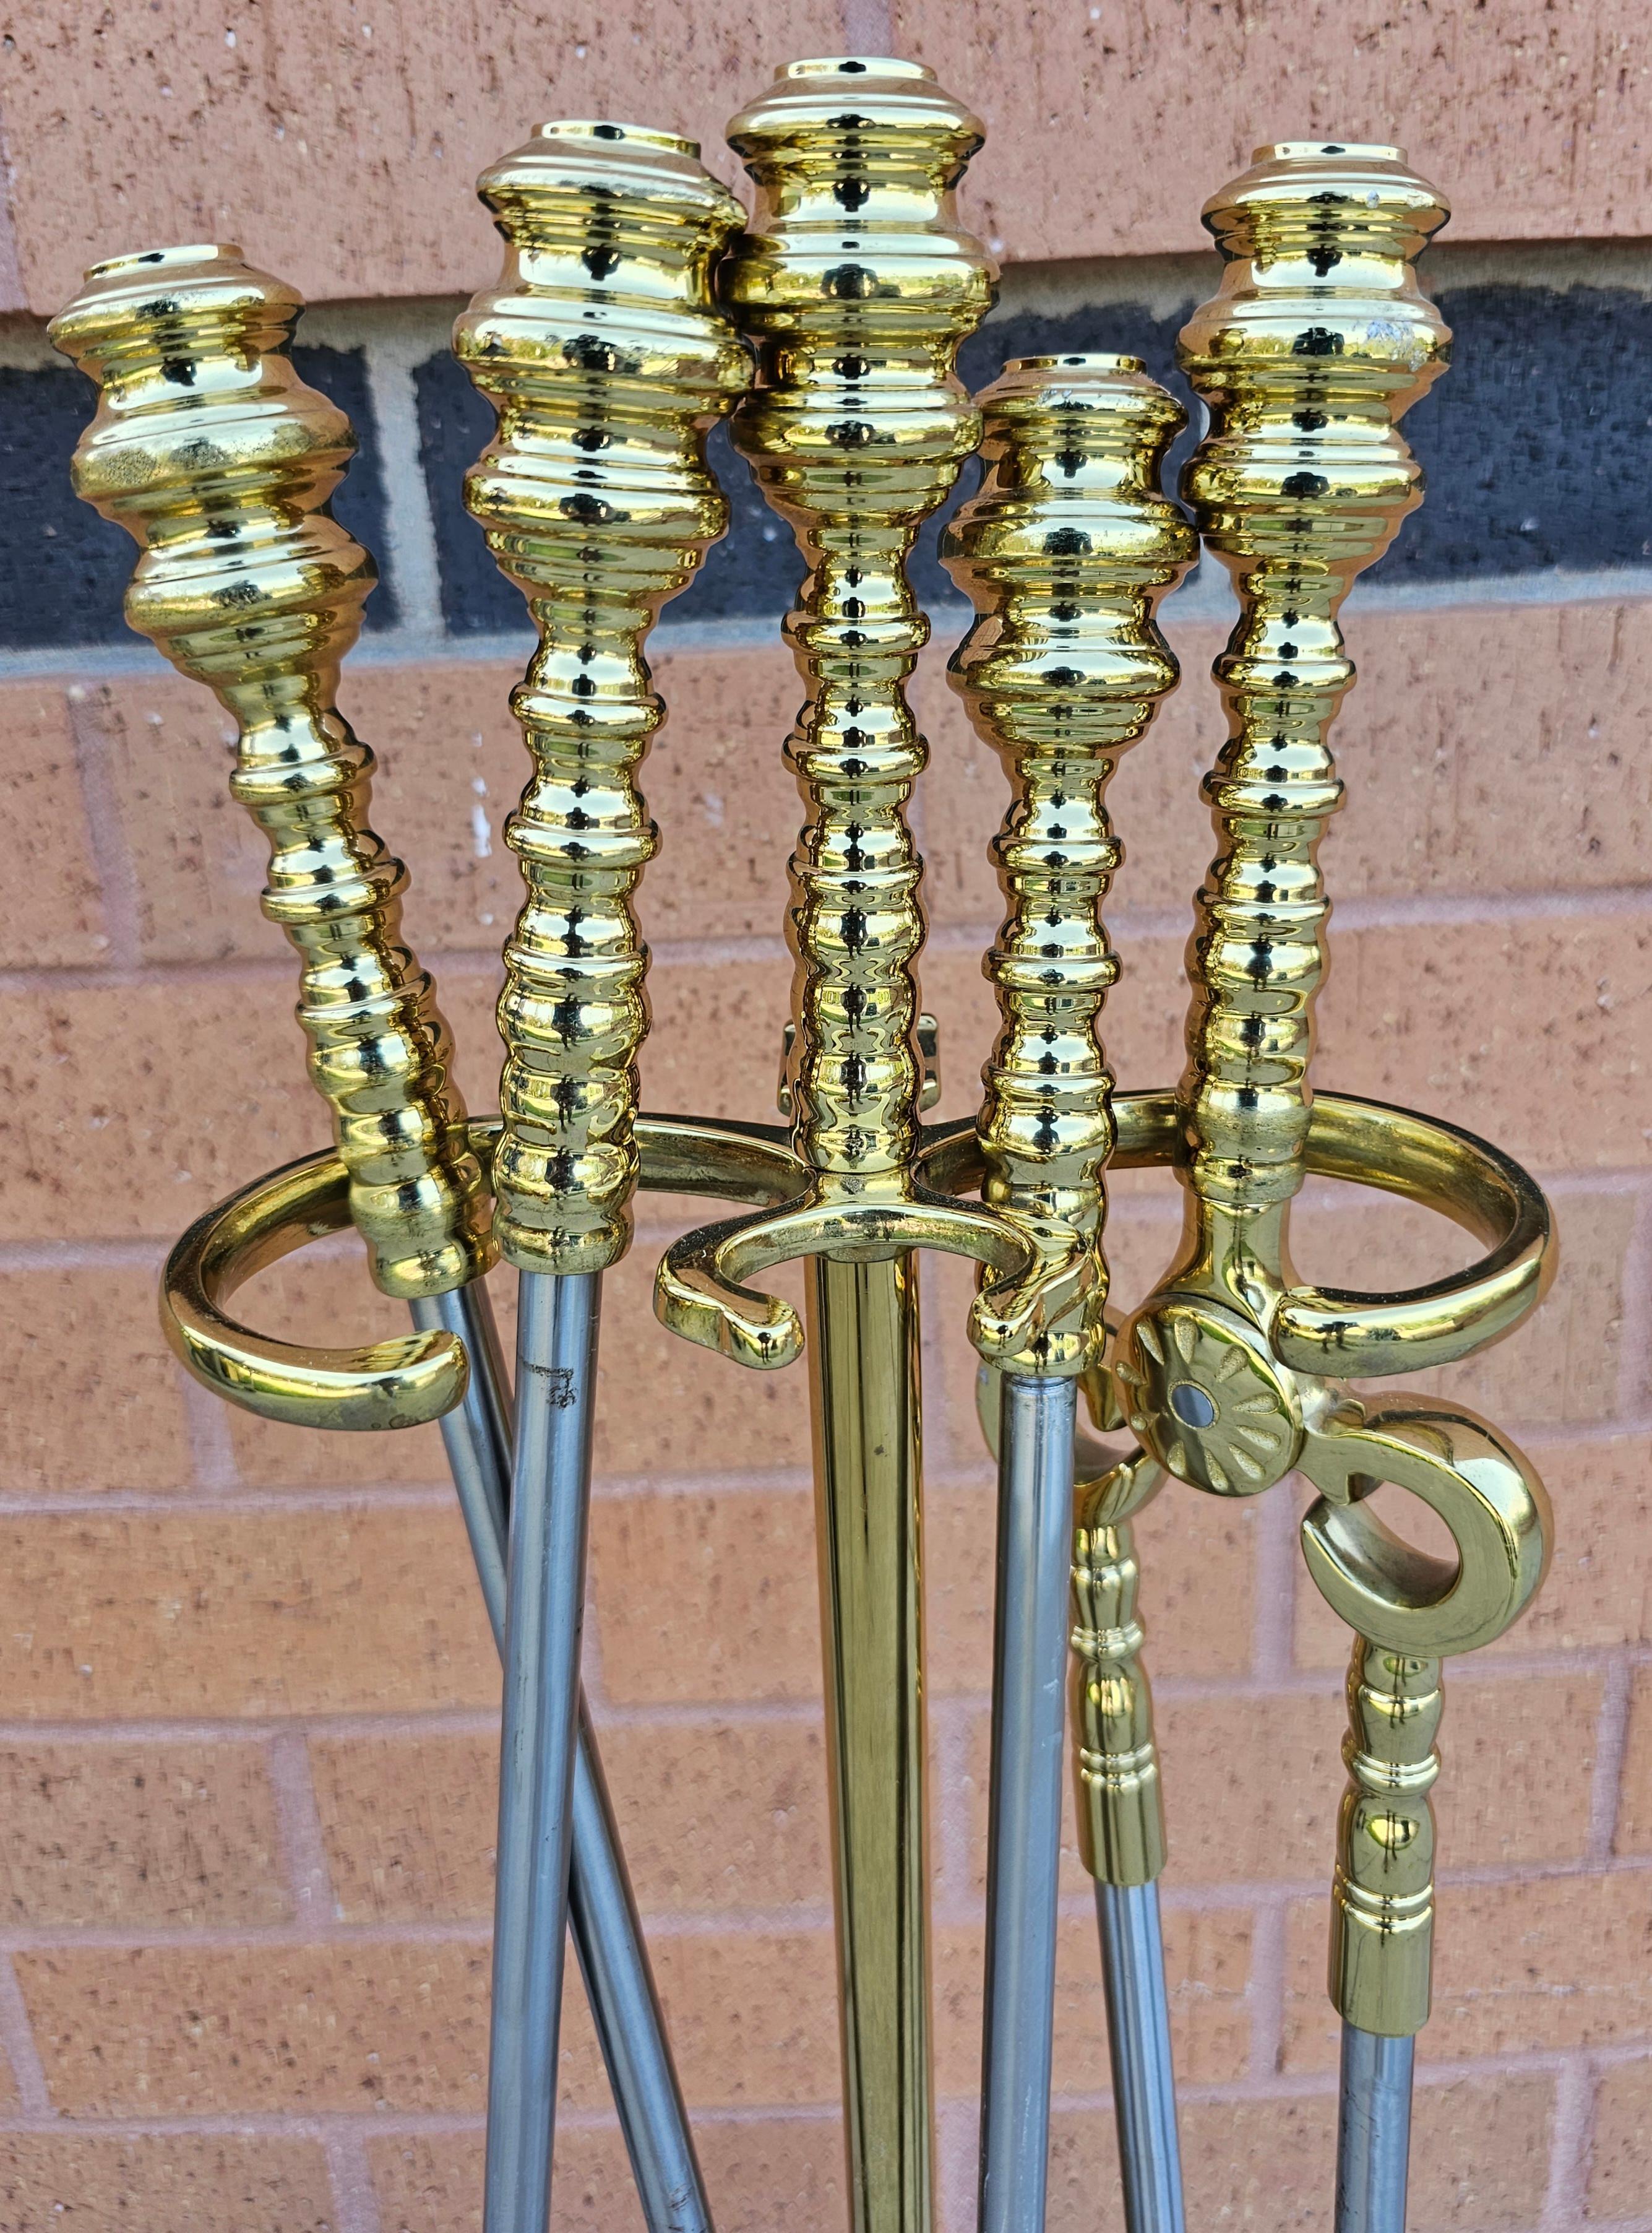 An exquisite set  of Federal Style Polished Brass and polished stee Fireplace Tool Set by Virginia MetalCrafters. Excellent vintage condition. Cast brass polished and polished steel. 
Stand with four tools as pictured